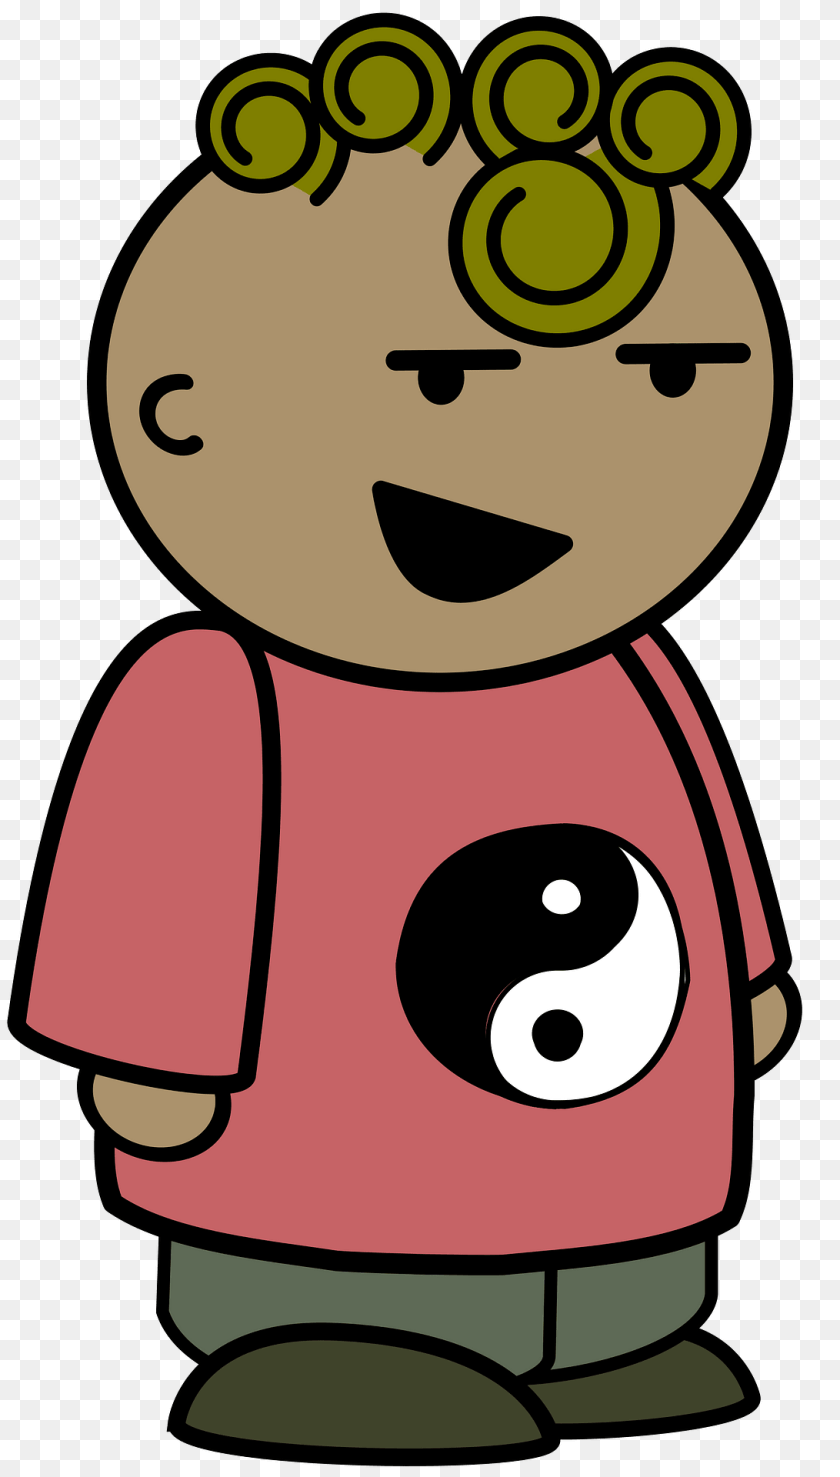 1092x1920 Curly Haired Boy In A Red Yin Yang Shirt Mouth Open To The Side Clipart, Cartoon, Ammunition, Grenade, Weapon Sticker PNG